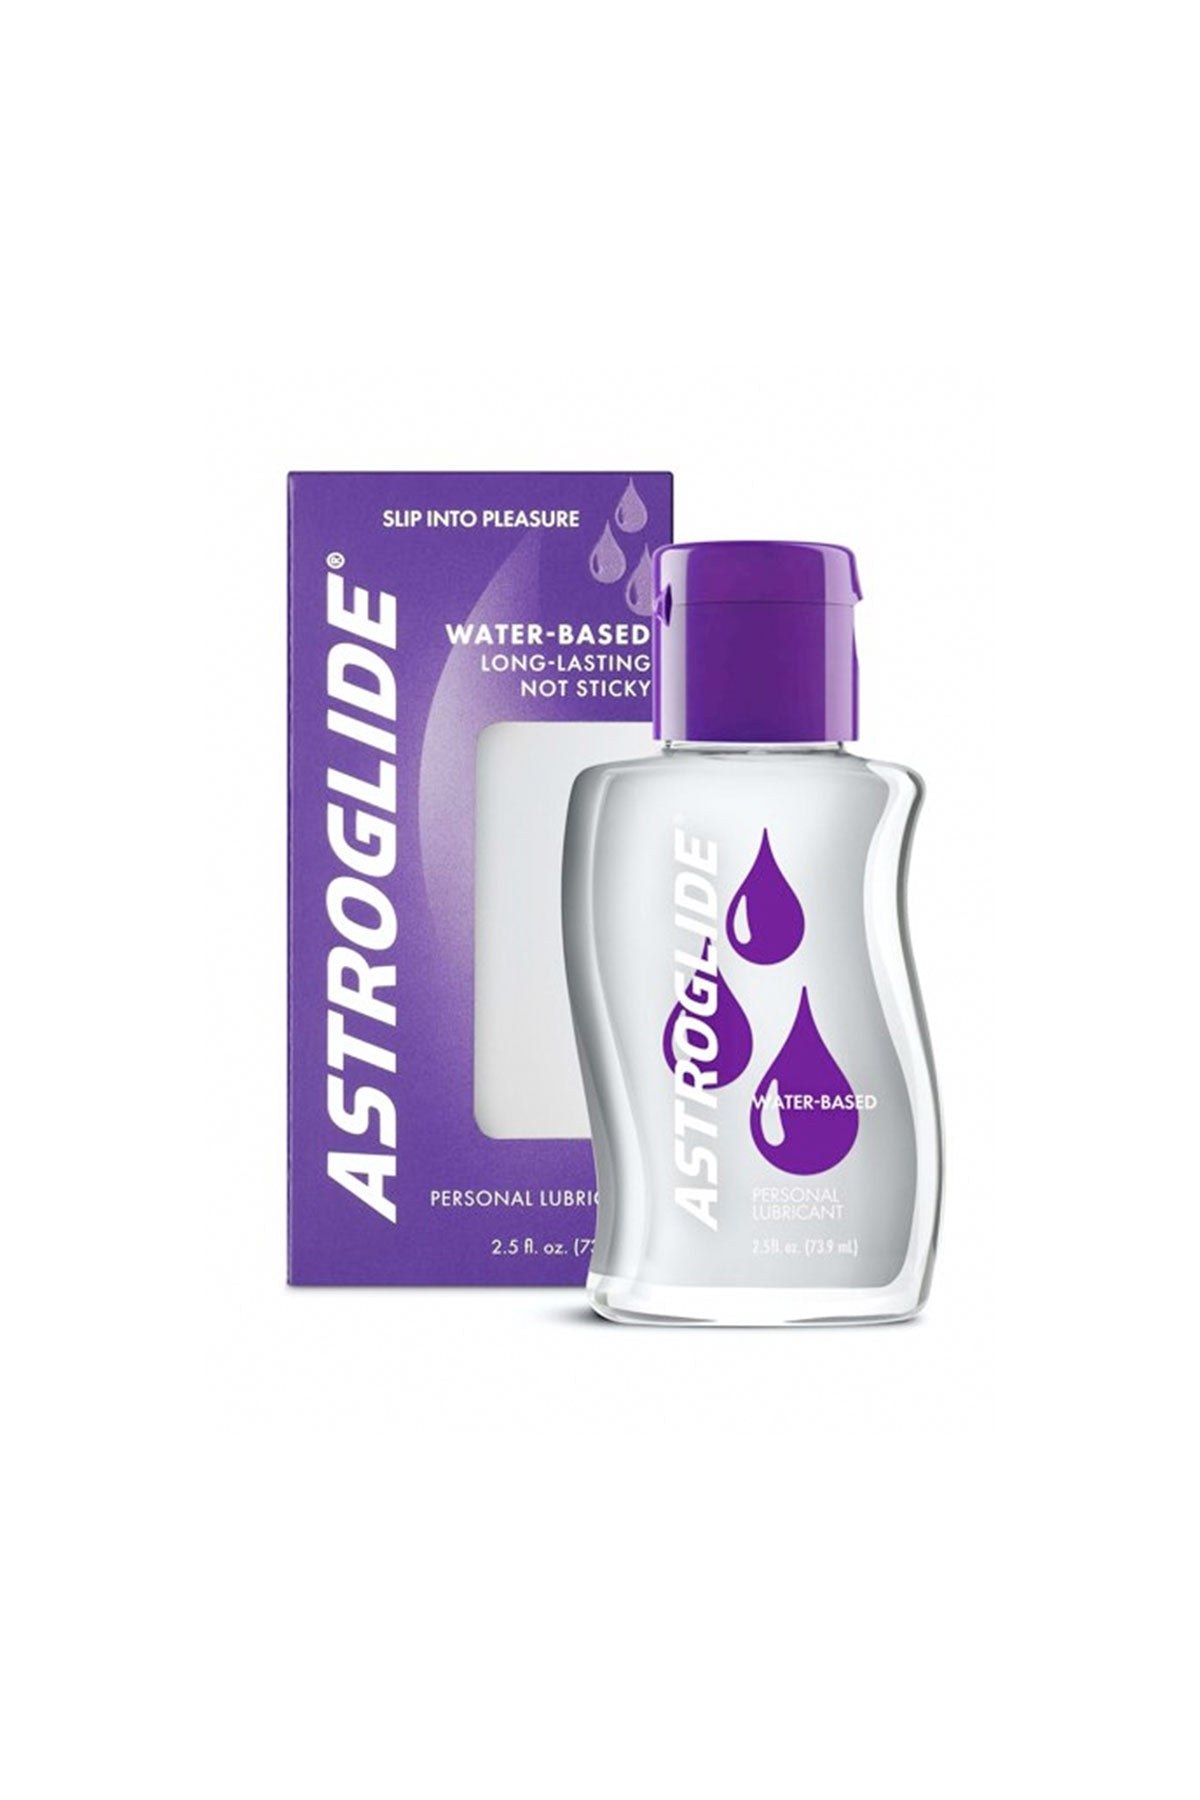 Astroglide Water-based Lubricant 